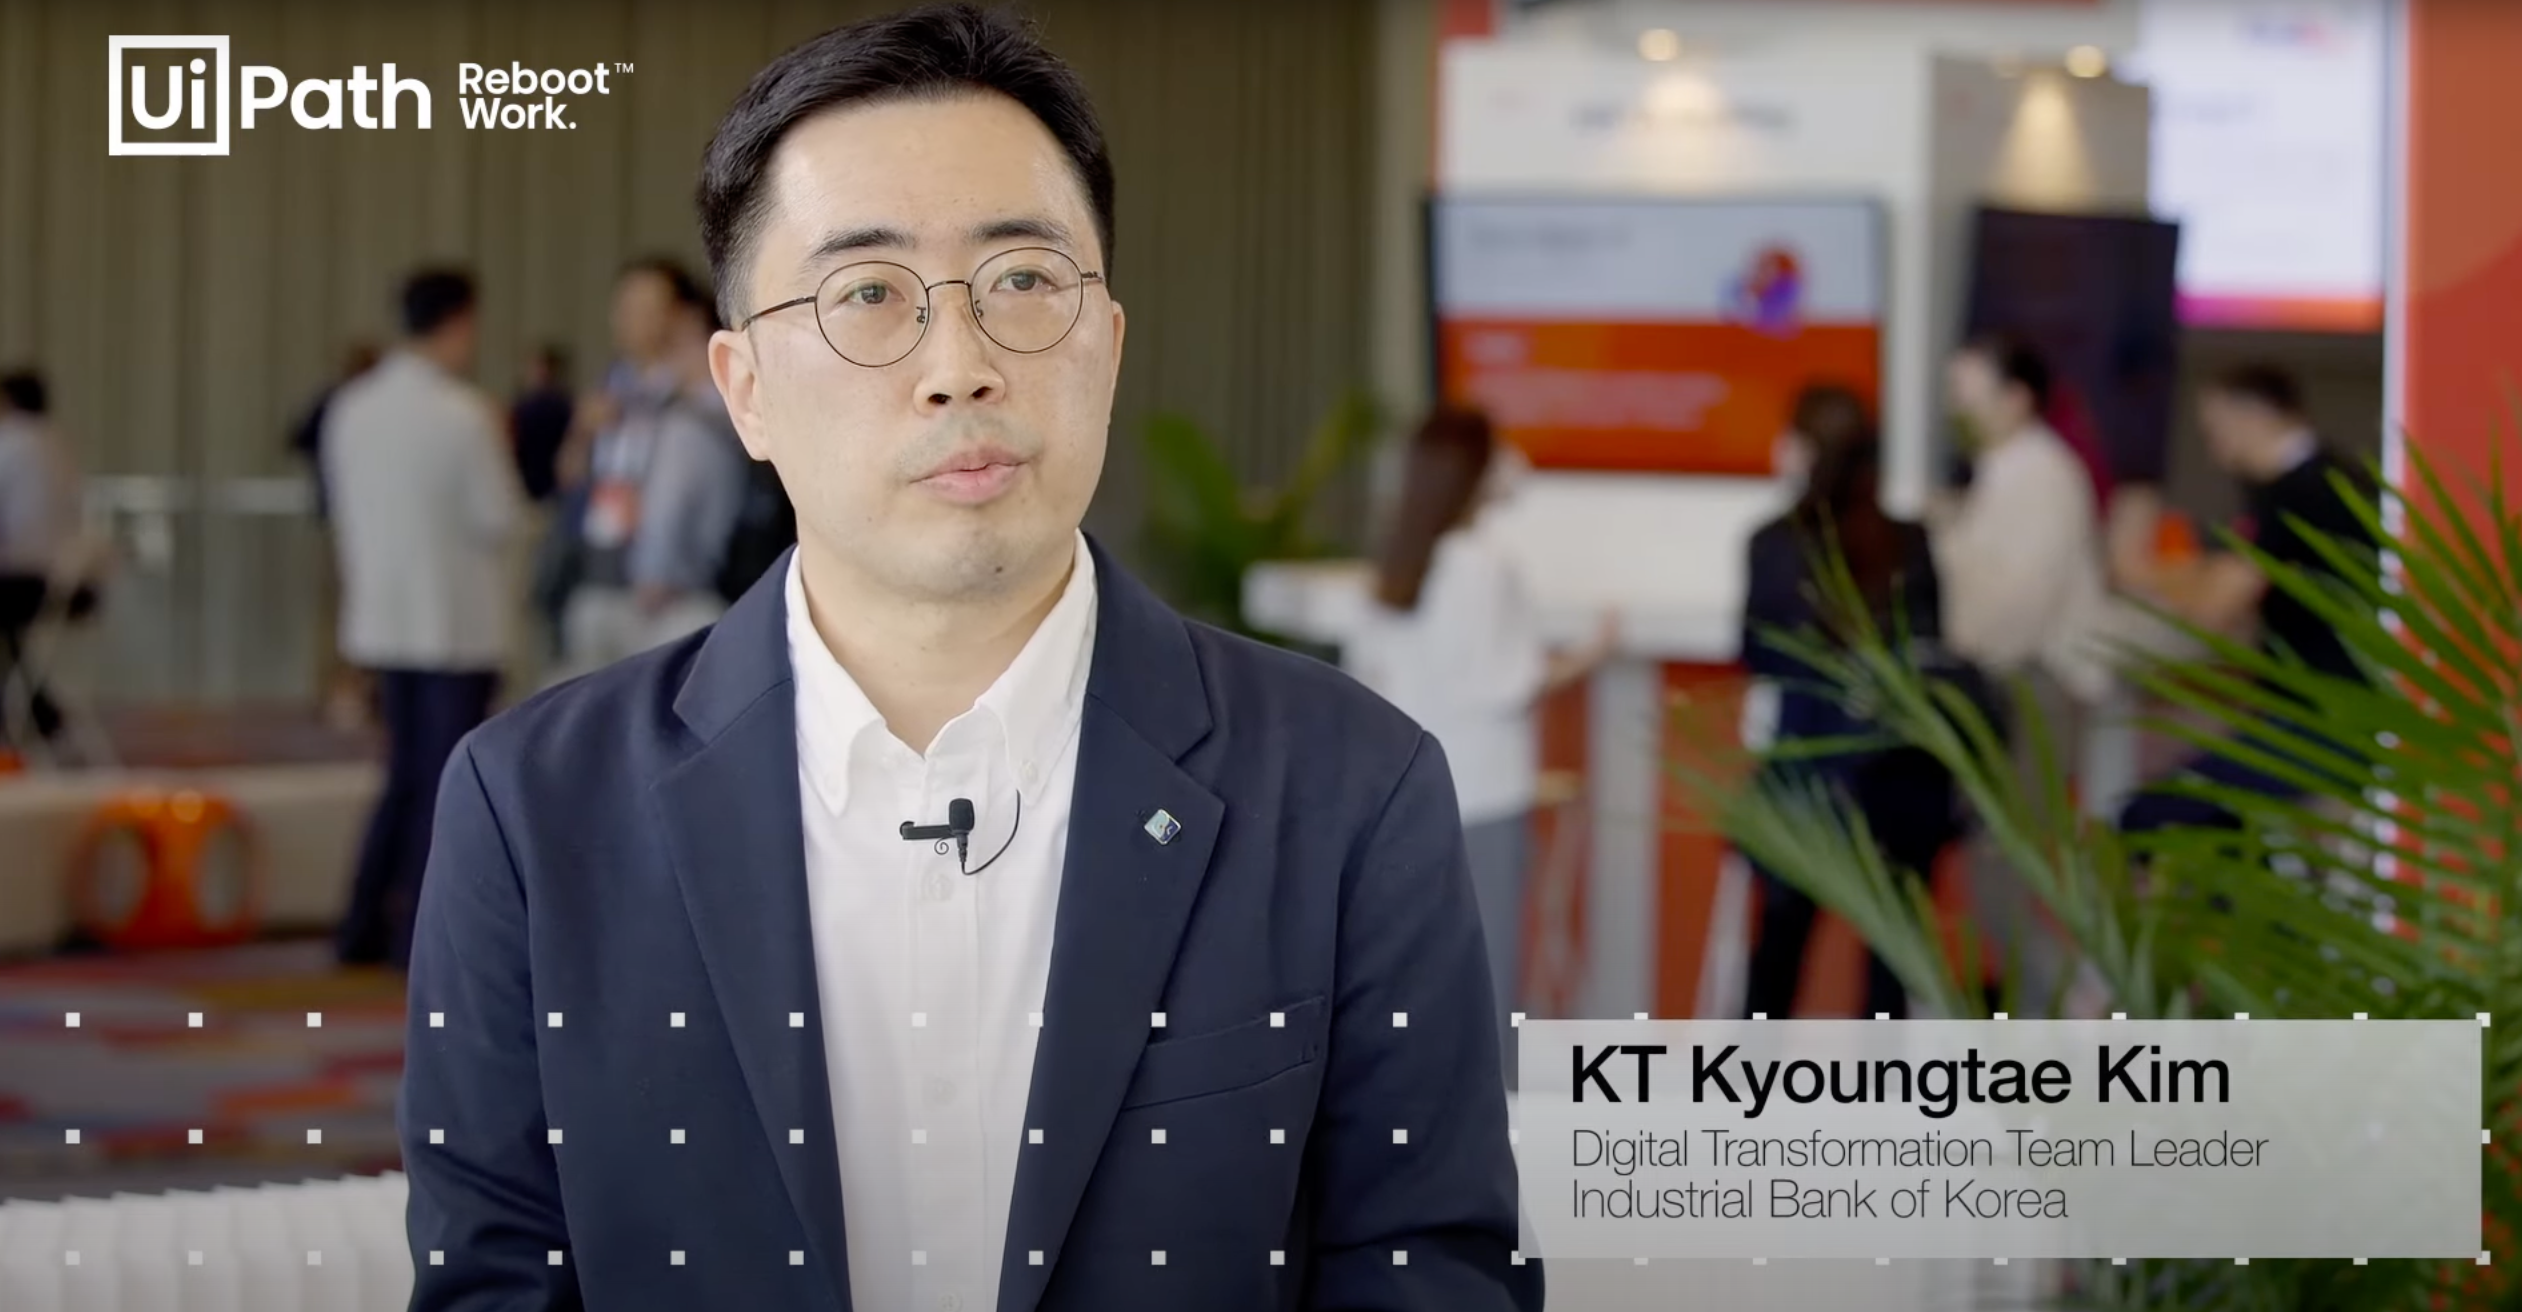 Prominent Korean bank uses UiPath automation to simplify loan management